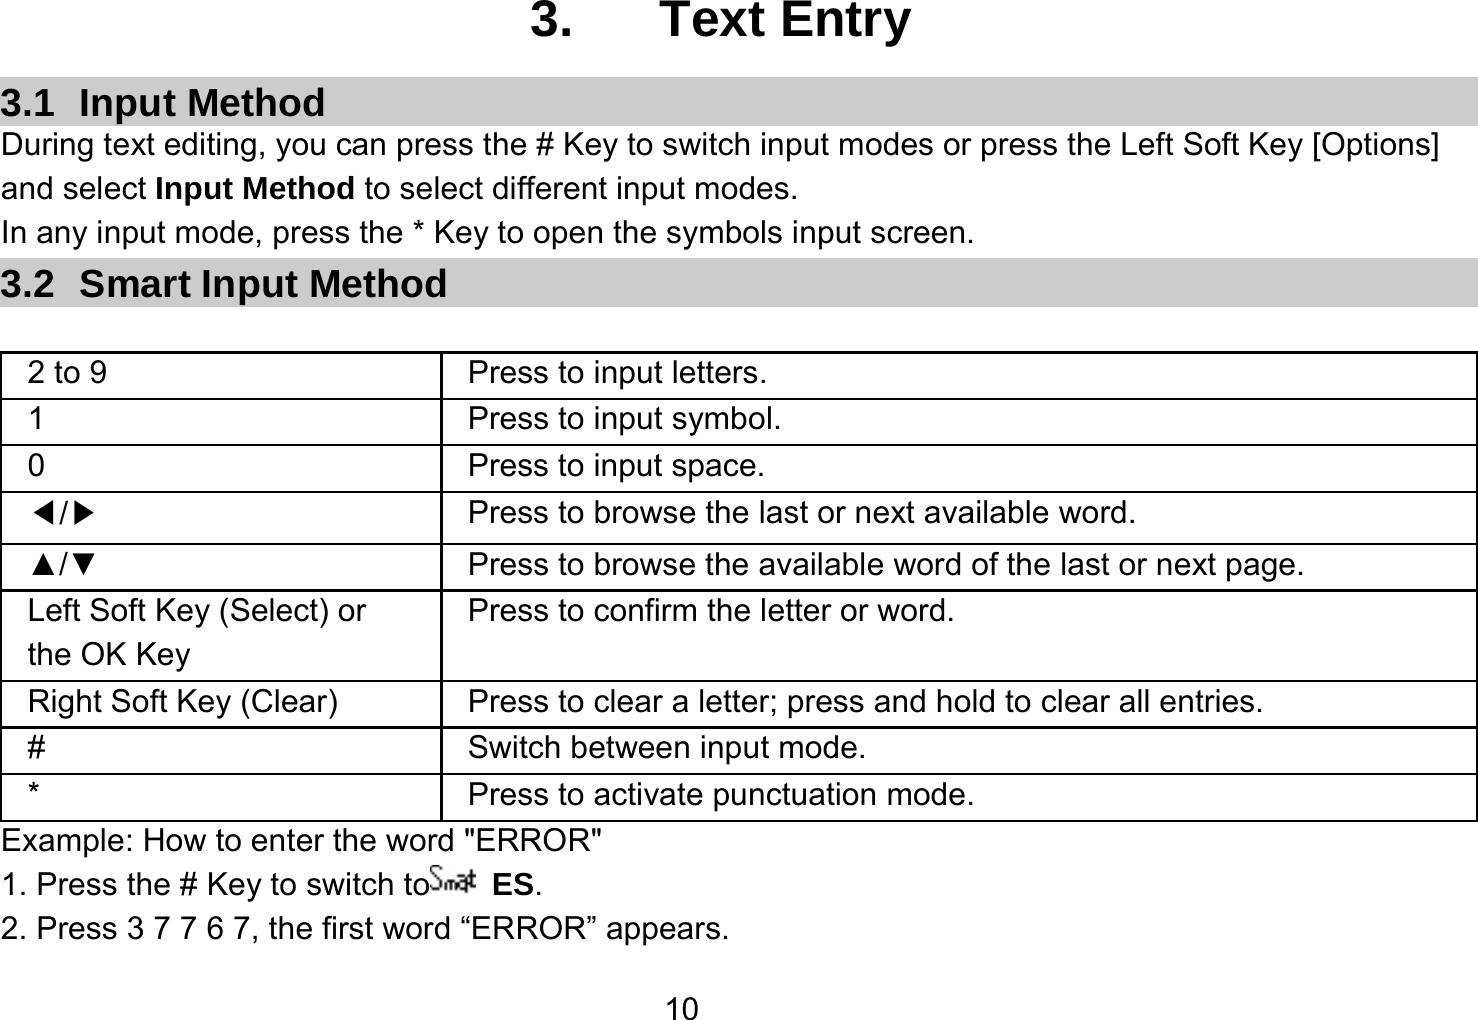   103.  Text Entry 3.1 Input Method During text editing, you can press the # Key to switch input modes or press the Left Soft Key [Options] and select Input Method to select different input modes. In any input mode, press the * Key to open the symbols input screen.   3.2  Smart Input Method  2 to 9  Press to input letters. 1  Press to input symbol. 0  Press to input space. ◀/▶ Press to browse the last or next available word. ▲/▼  Press to browse the available word of the last or next page. Left Soft Key (Select) or the OK Key Press to confirm the letter or word. Right Soft Key (Clear)  Press to clear a letter; press and hold to clear all entries. #  Switch between input mode. *  Press to activate punctuation mode. Example: How to enter the word &quot;ERROR&quot; 1. Press the # Key to switch to  ES. 2. Press 3 7 7 6 7, the first word “ERROR” appears. 